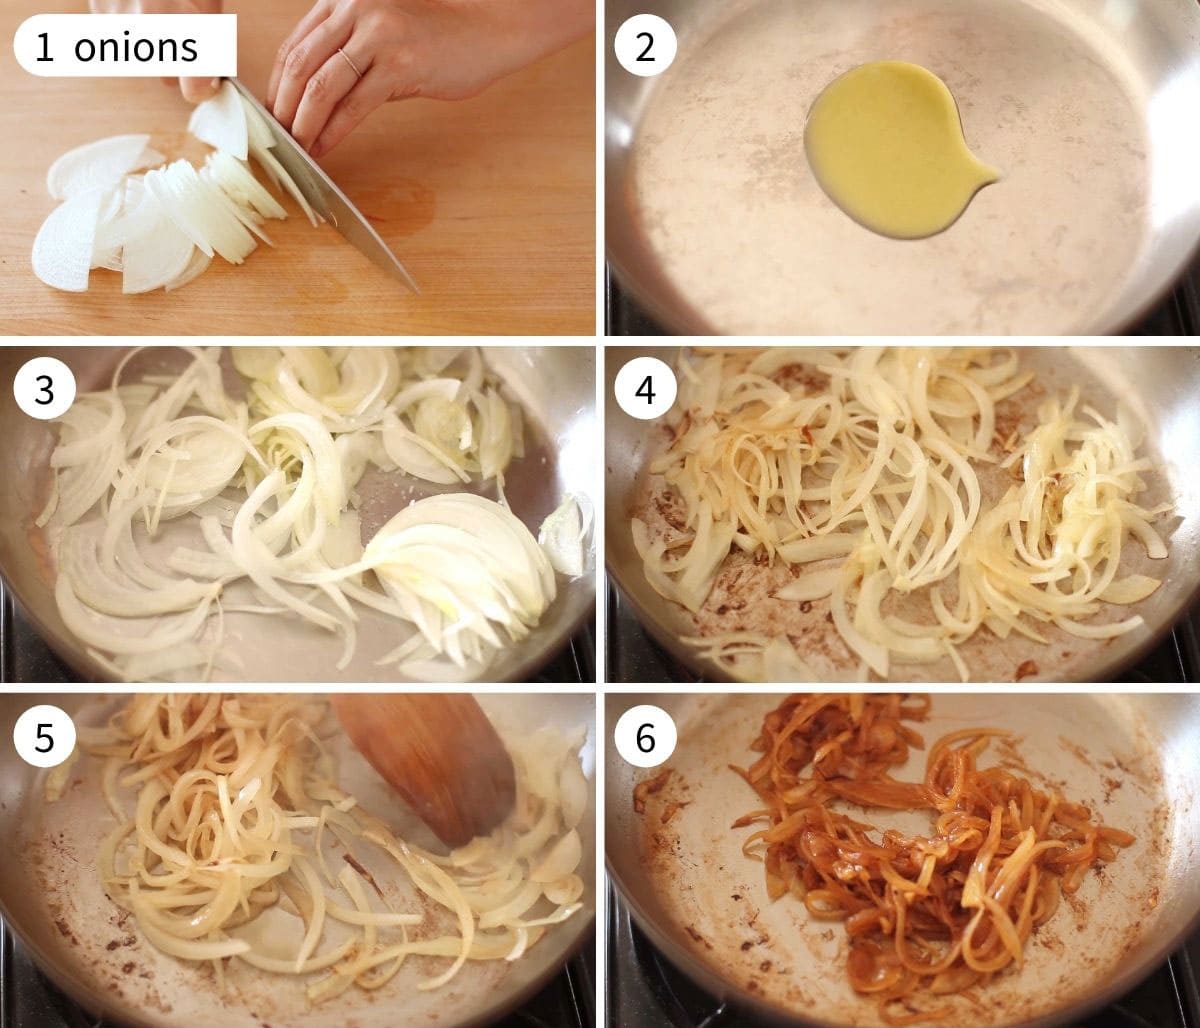 Six step-by-step photos on how to caramelize onions from thinly slicing an onion to slowly cooking them on medium-low heat in a pan.